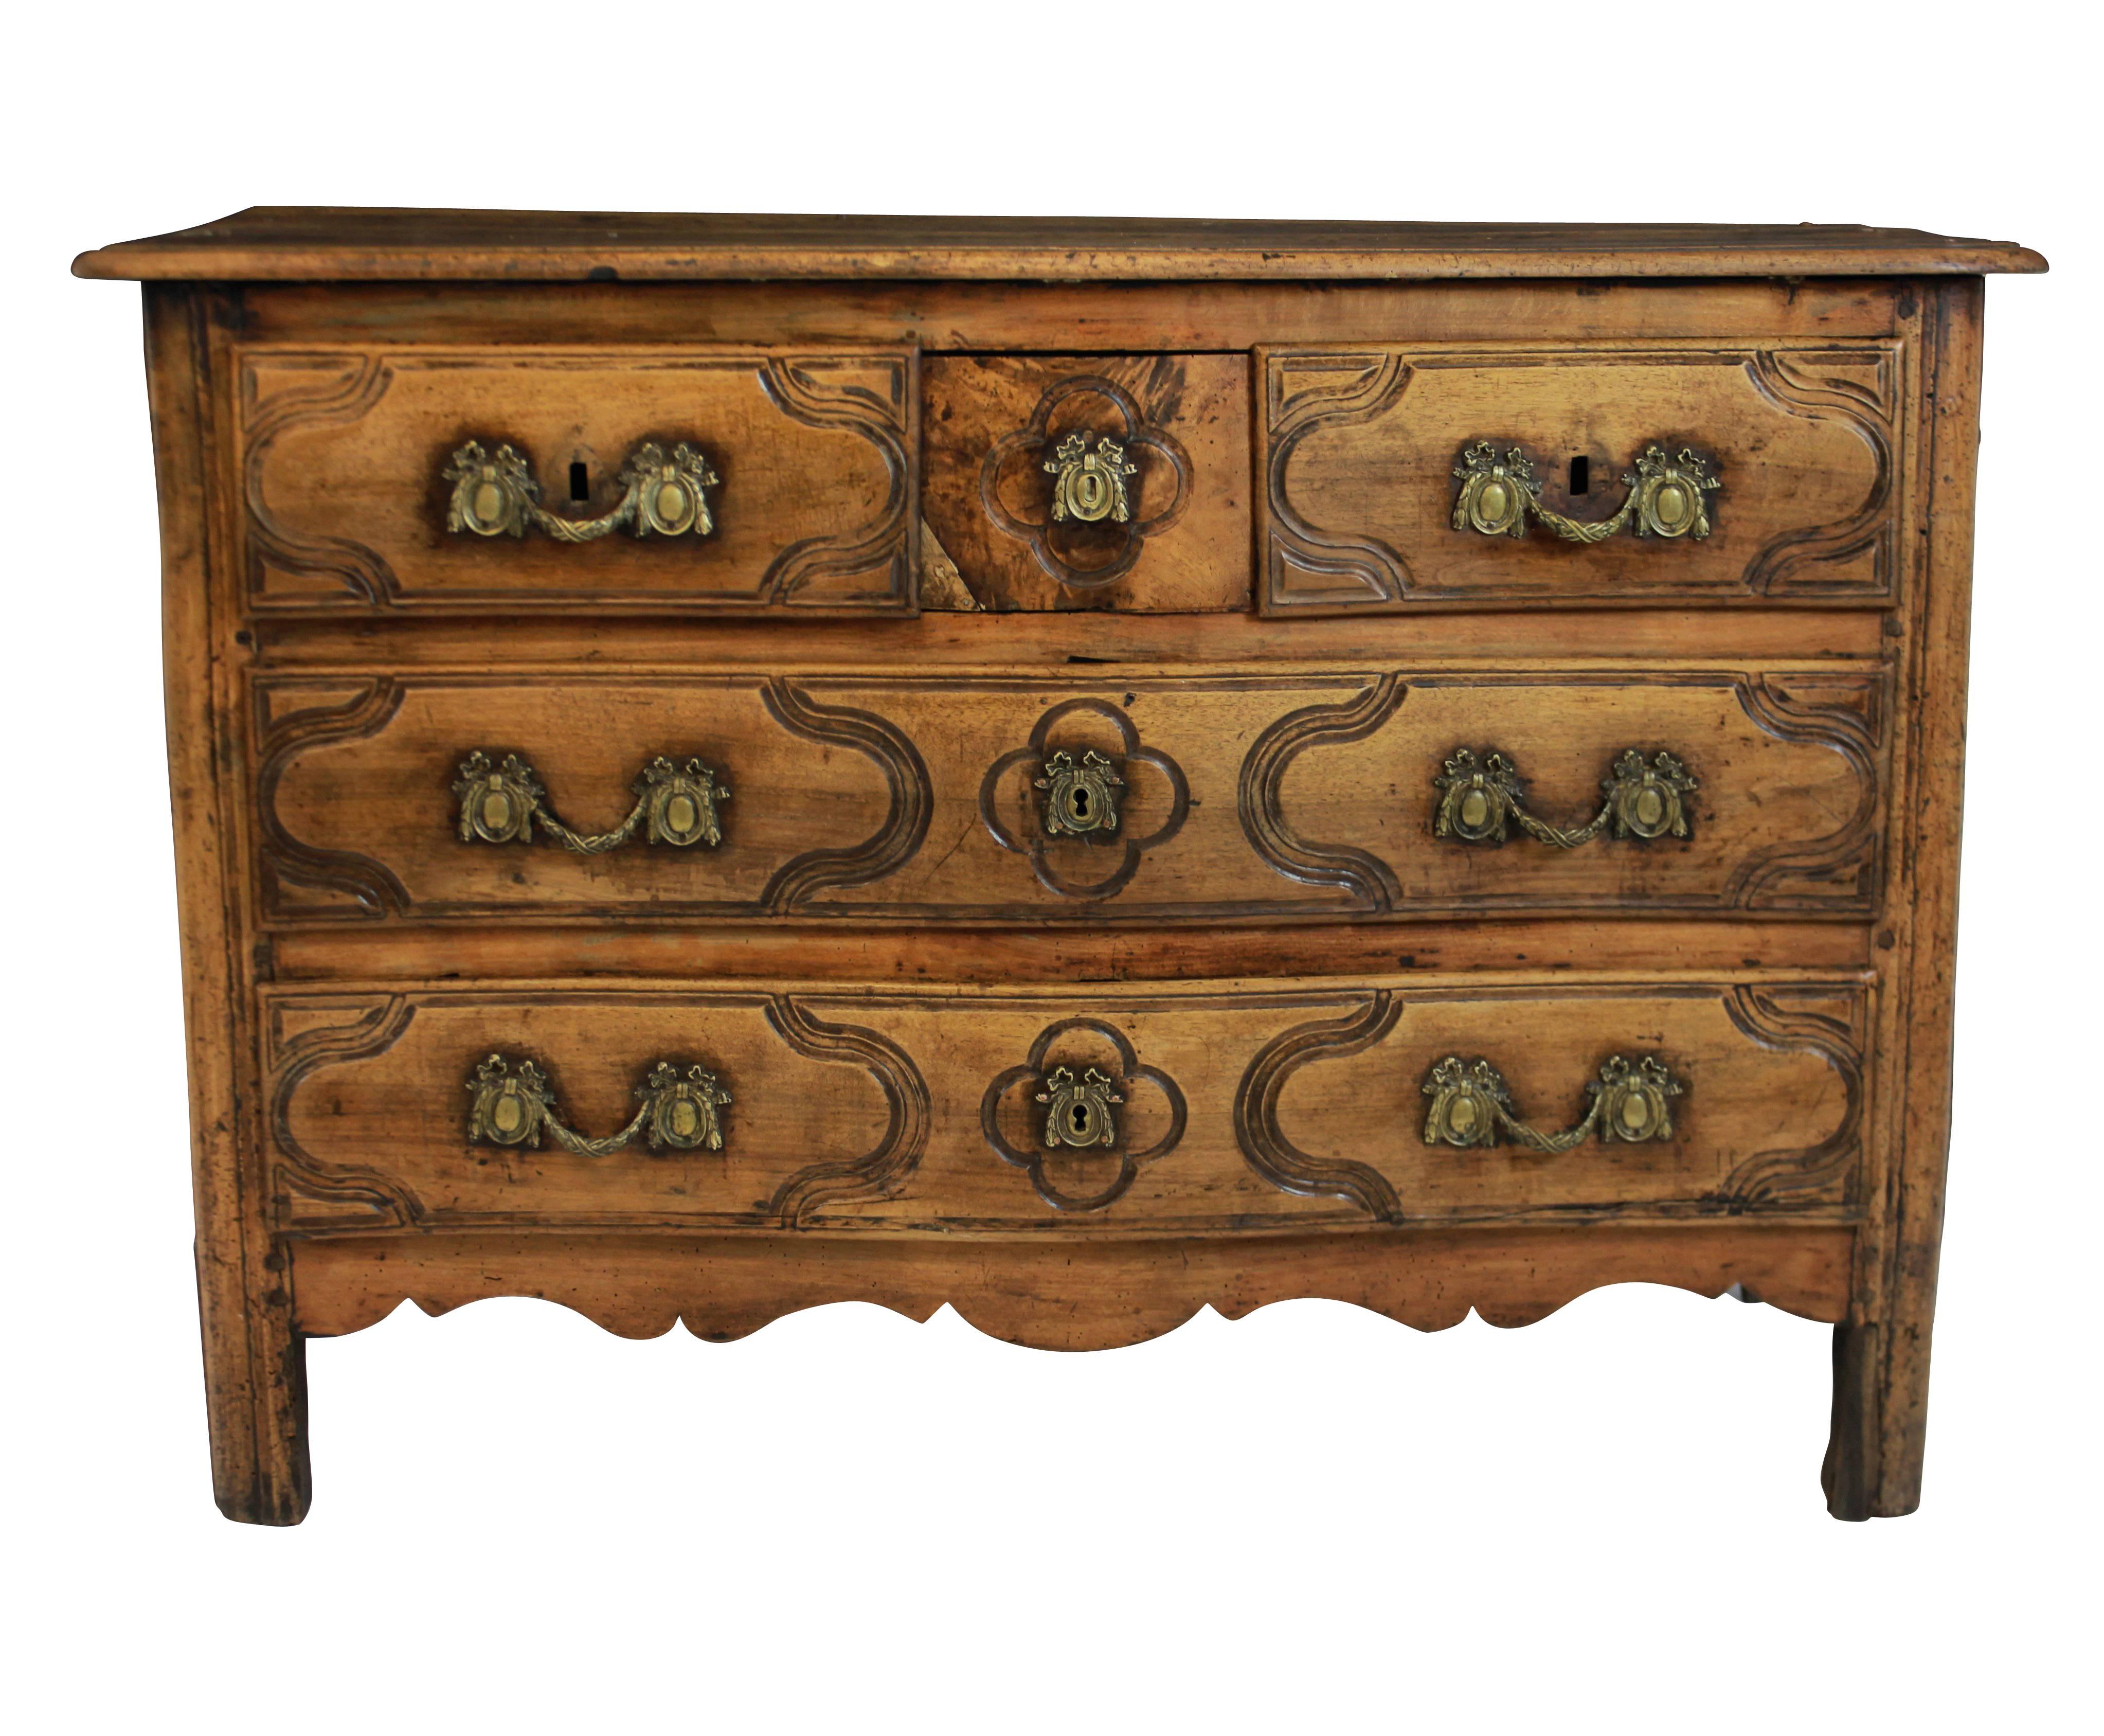 An 18th century French Provincial walnut commode, with serpentine front and five drawers. The original handles in brass, overall with a great patina.
   